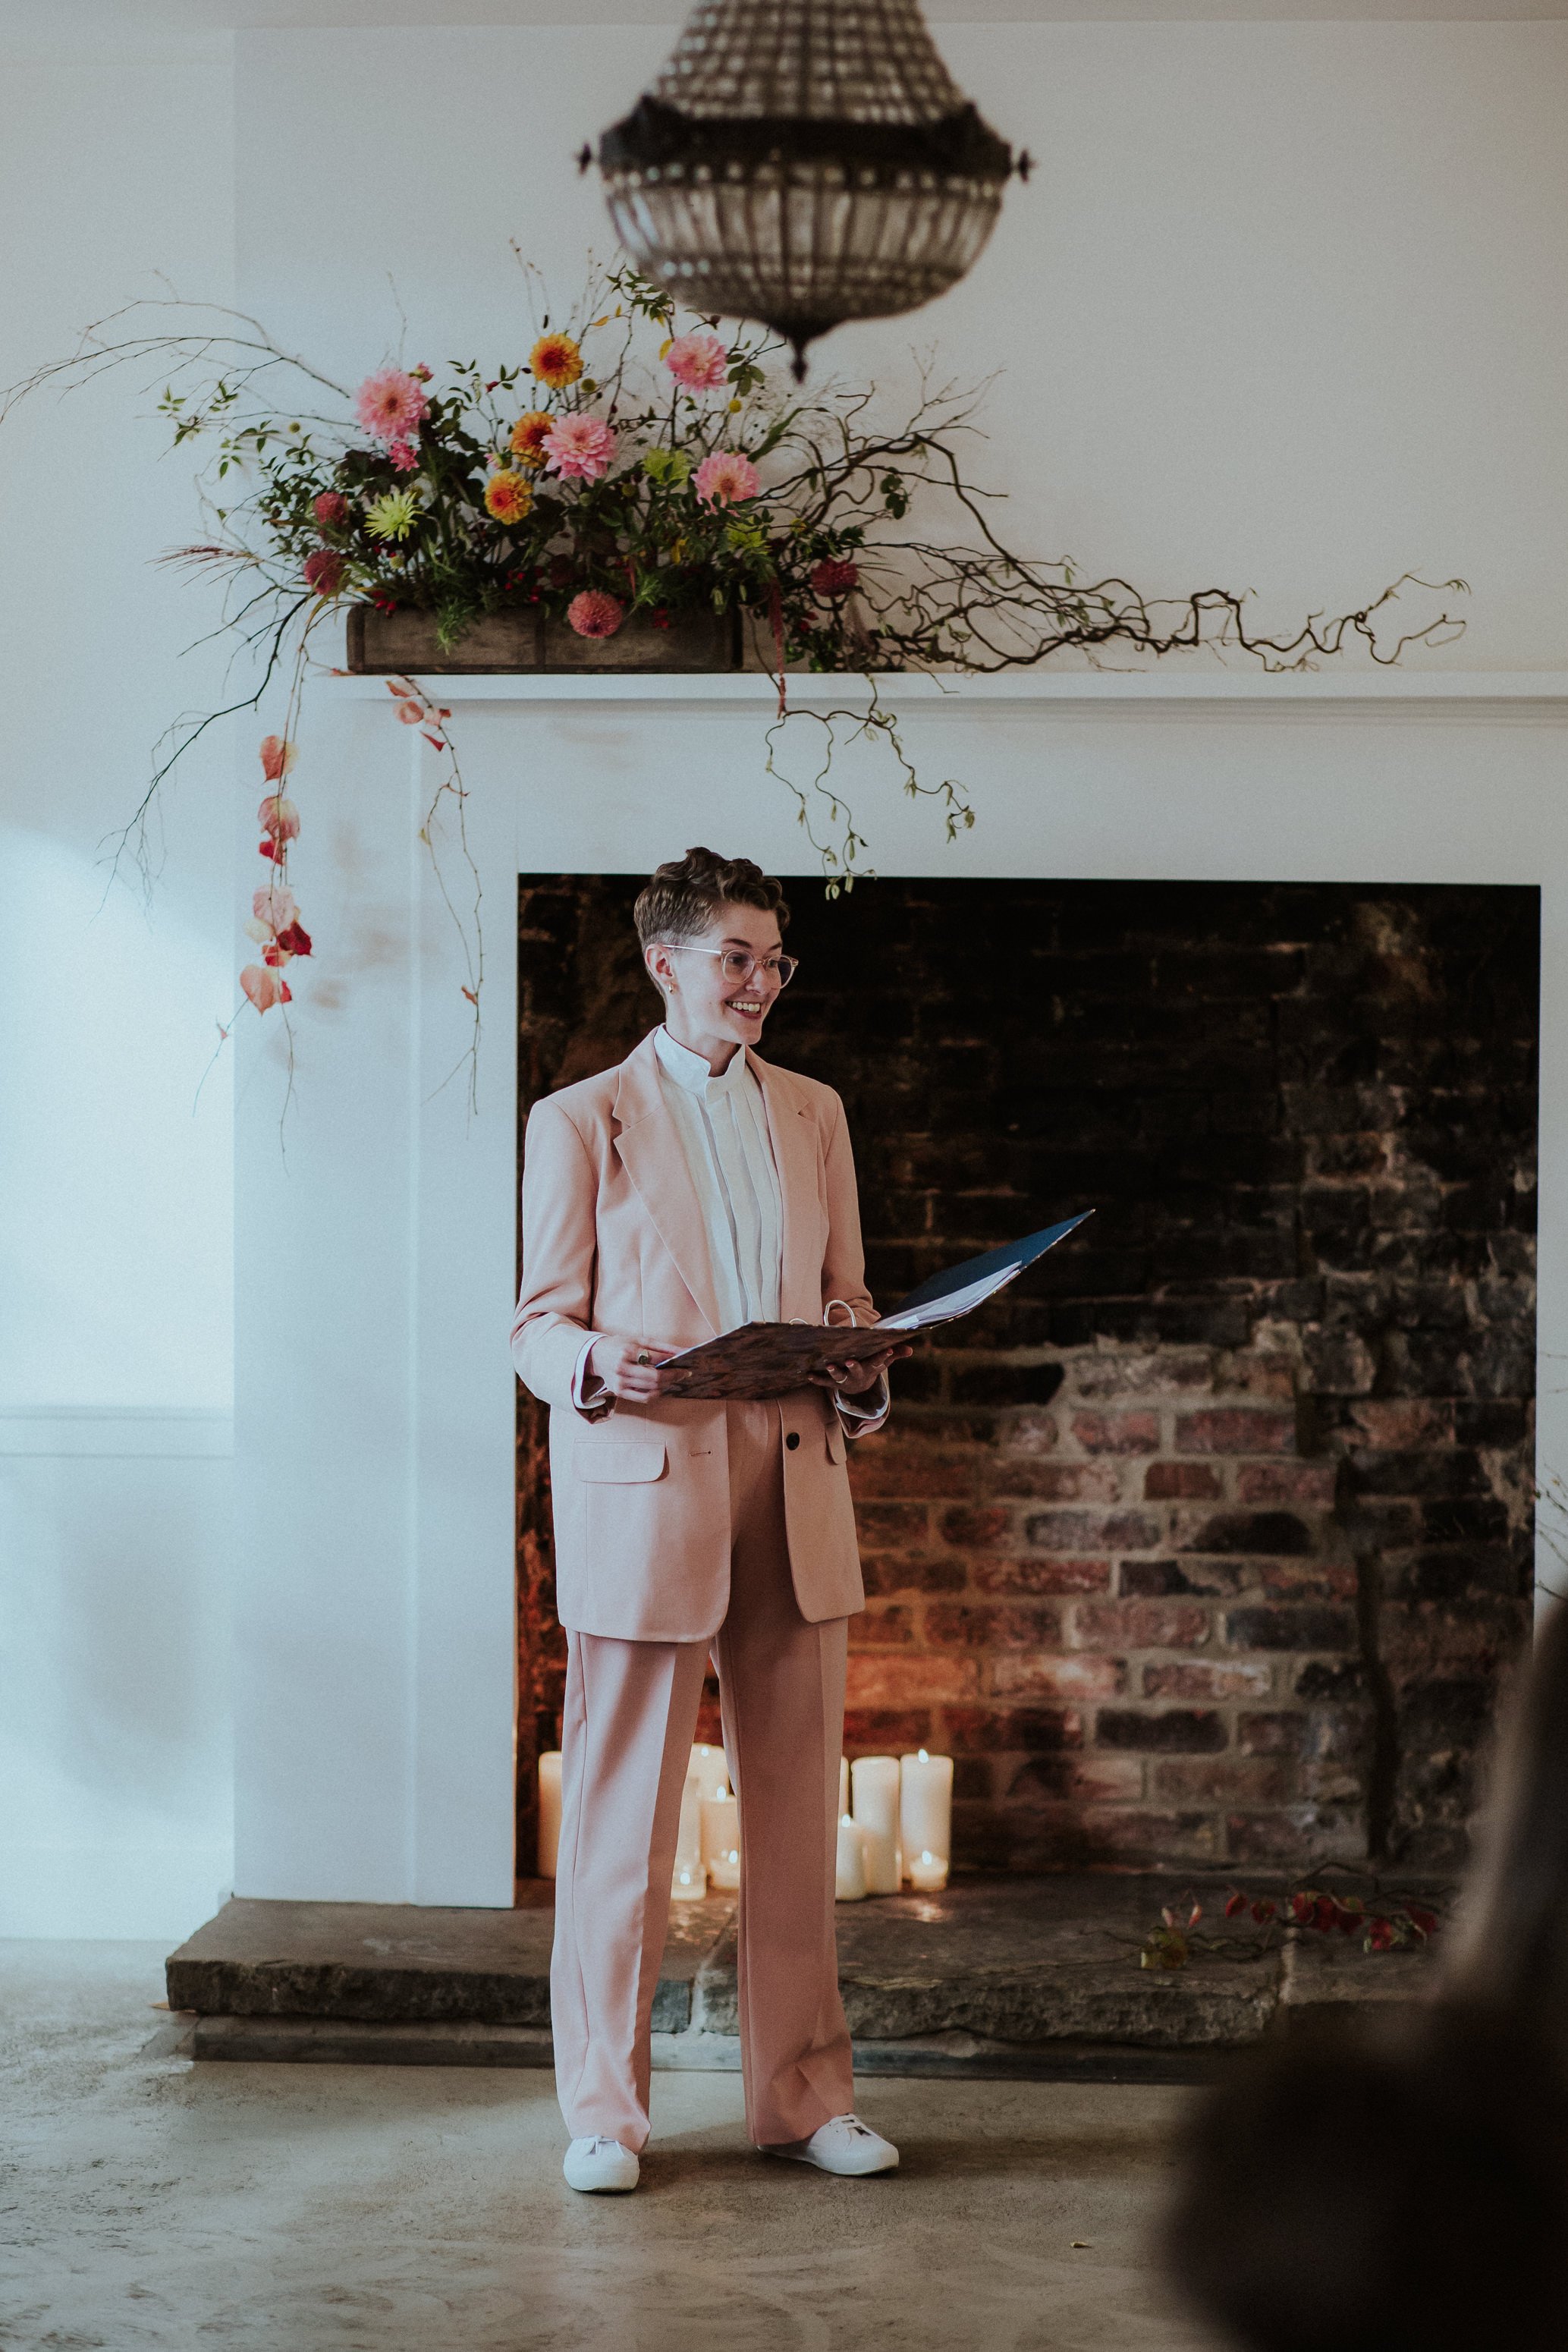  A natural shot of the celebrant delivering her bespoke wedding ceremony full of warmth and laughter to the brides and their wedding guests. She is wearing a beige suit, white shirt and white trainers.  Photo by: Steven Haddock Photography 